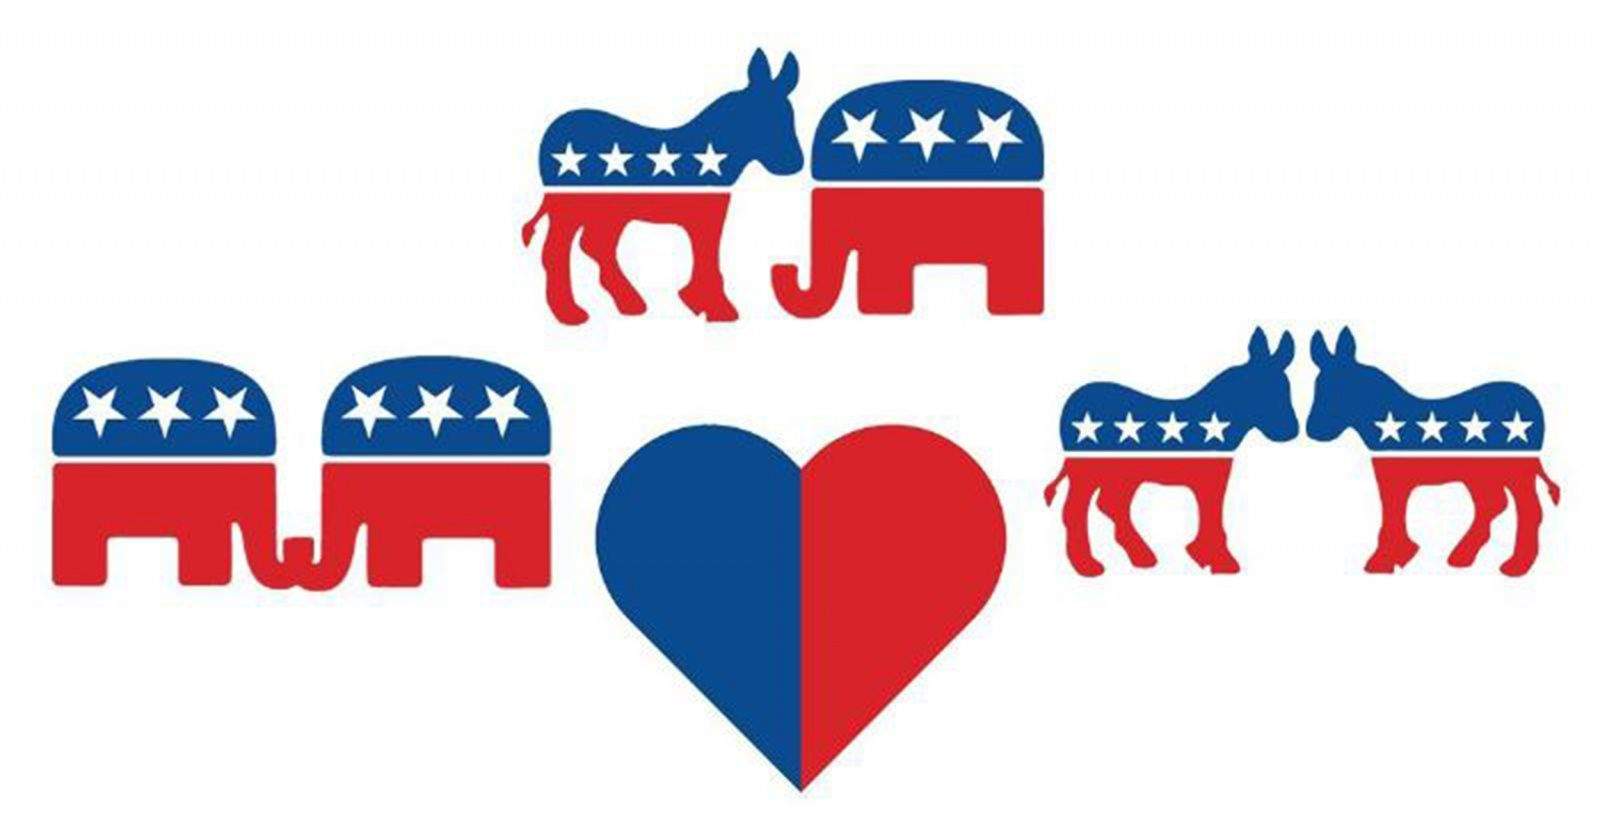 The dating app candiDate helps you find a political soulmate - and reminds you to vote. Illustration courtesy of HelpsGood